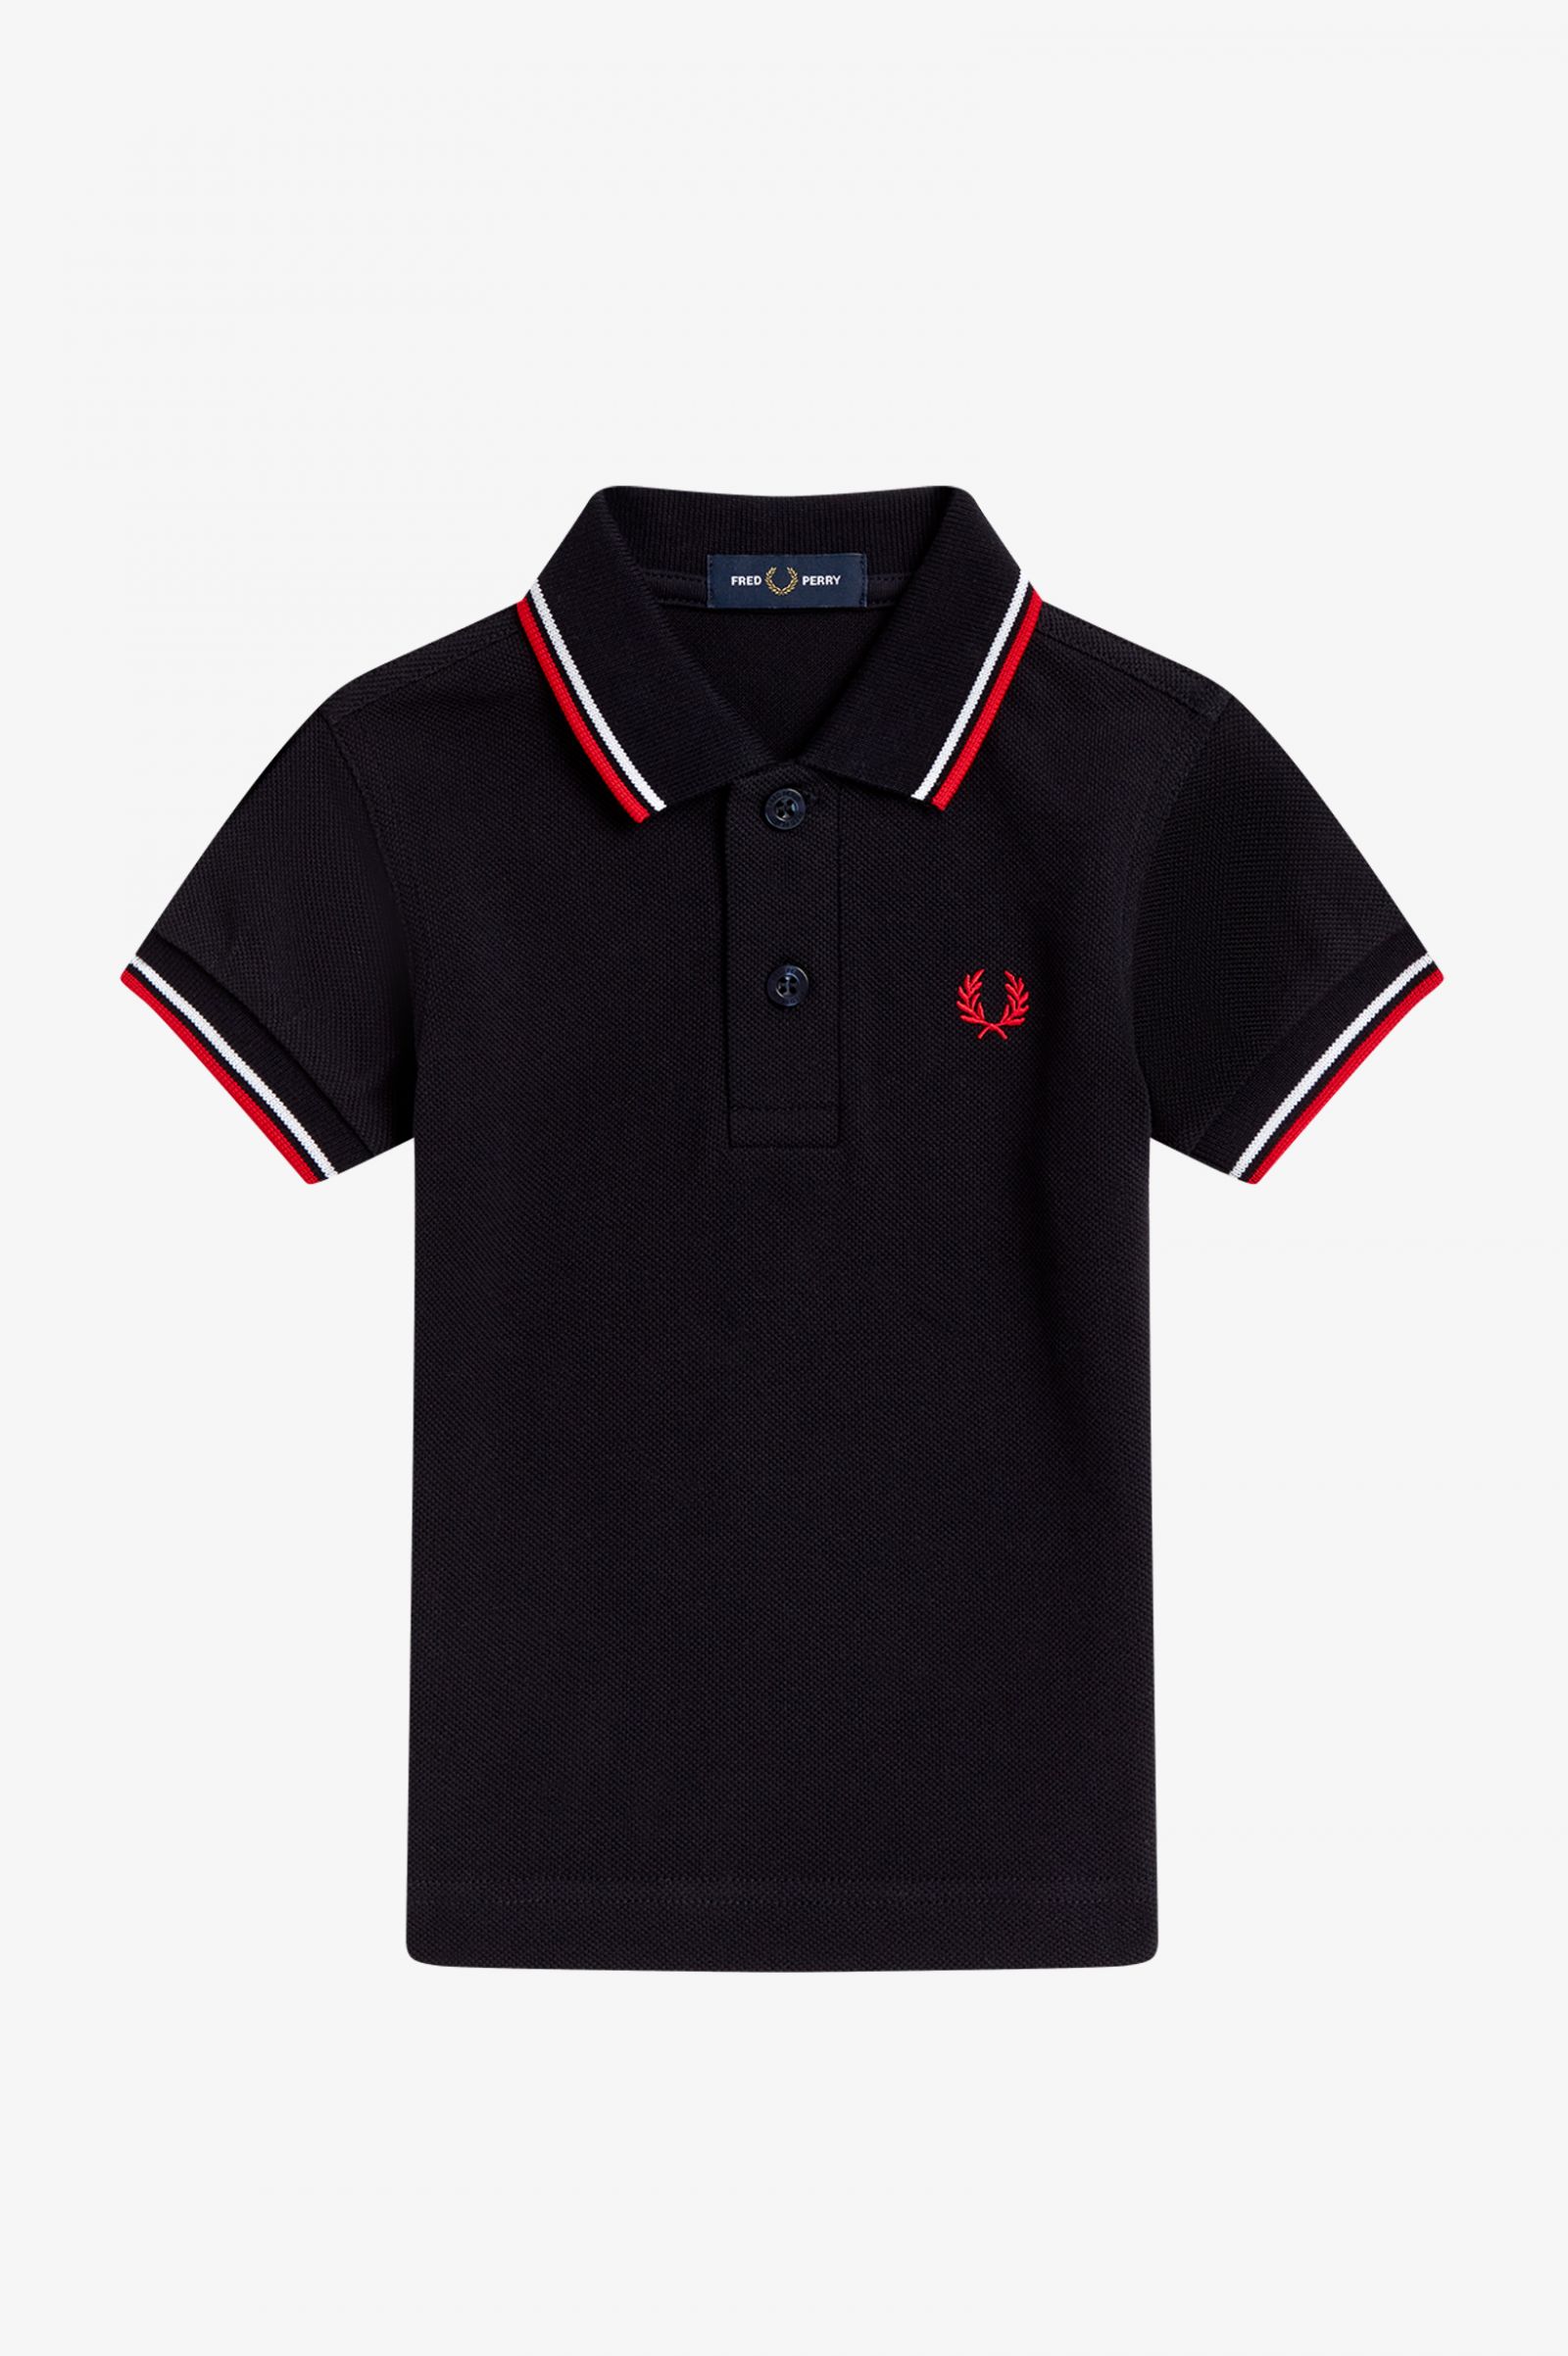 Uitsteken Afleiding Vlot My First Fred Perry Shirt - Navy / White / Red | Kids | Children's Polo  Shirts & Kids Designer Clothes | Fred Perry US